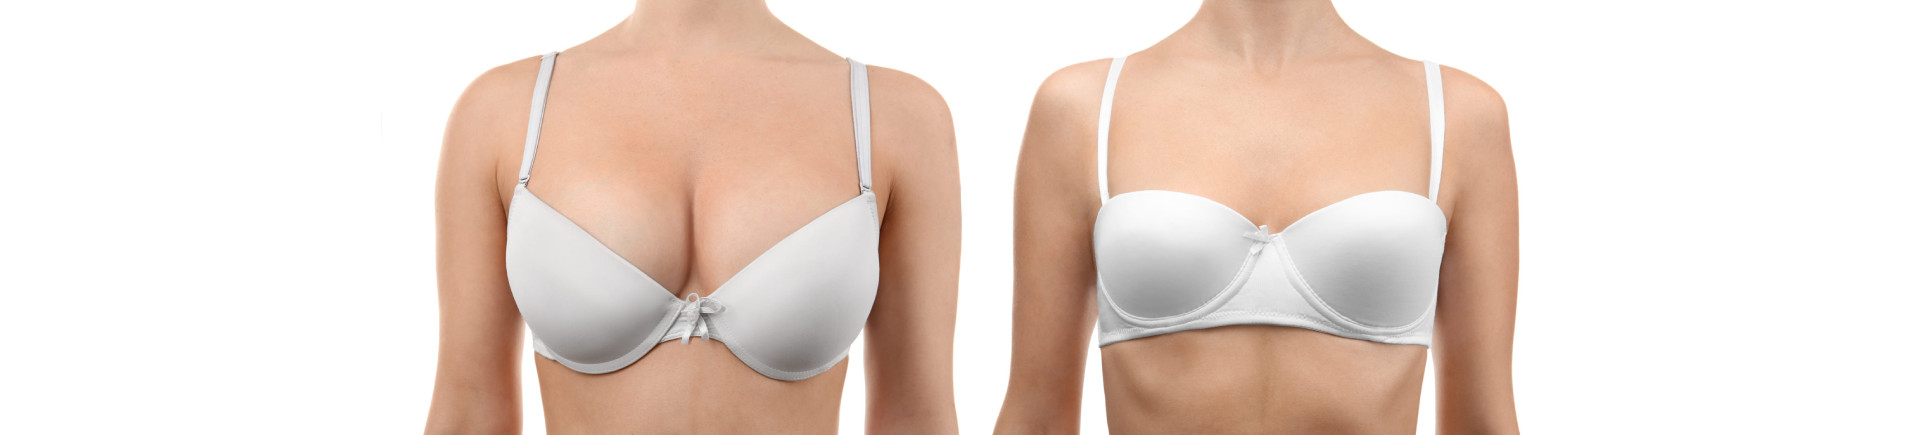 Woman's breast before and after implant removal surgery.